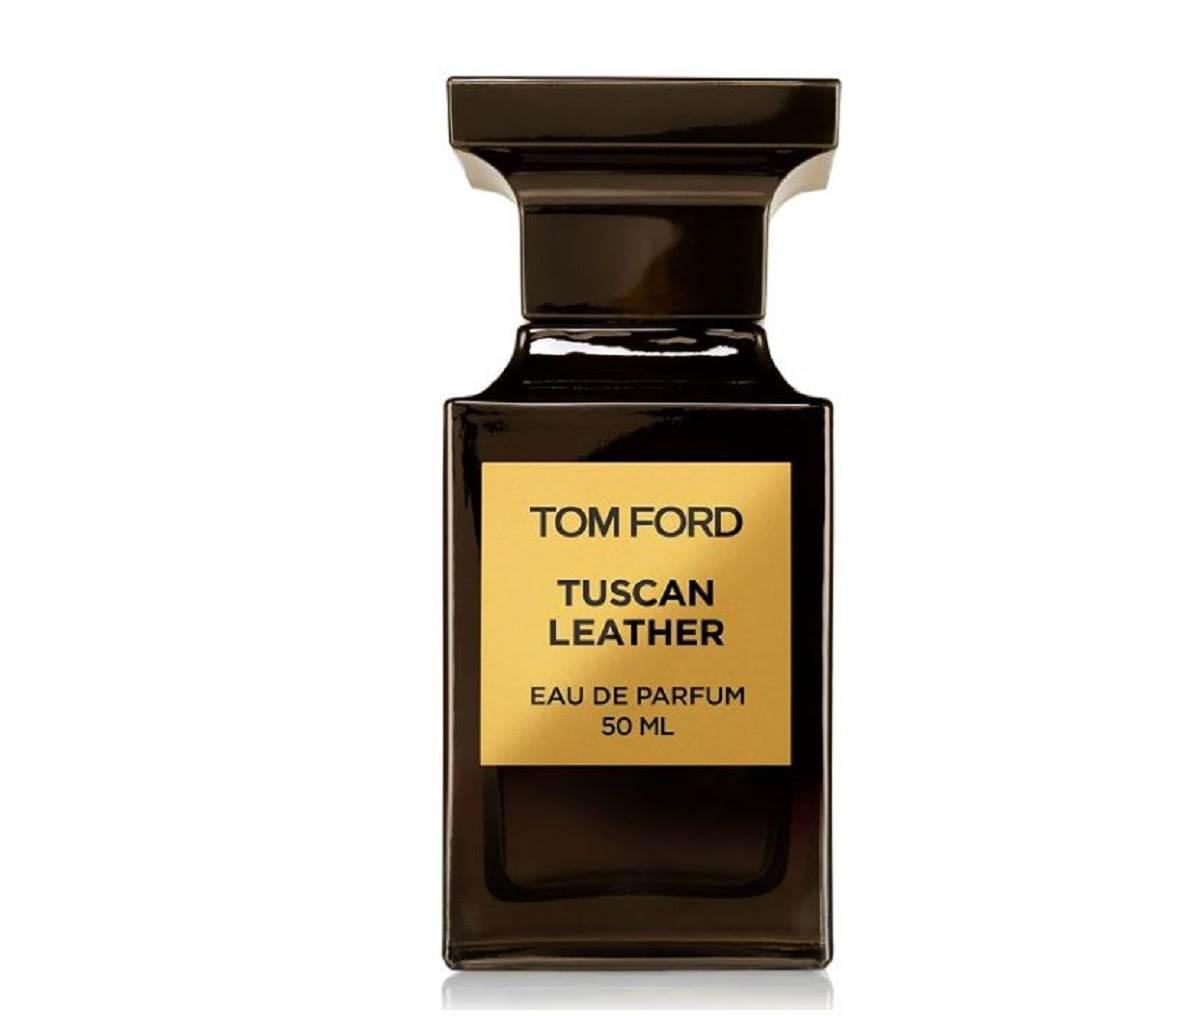  Tom Ford Tuscan Leather. 